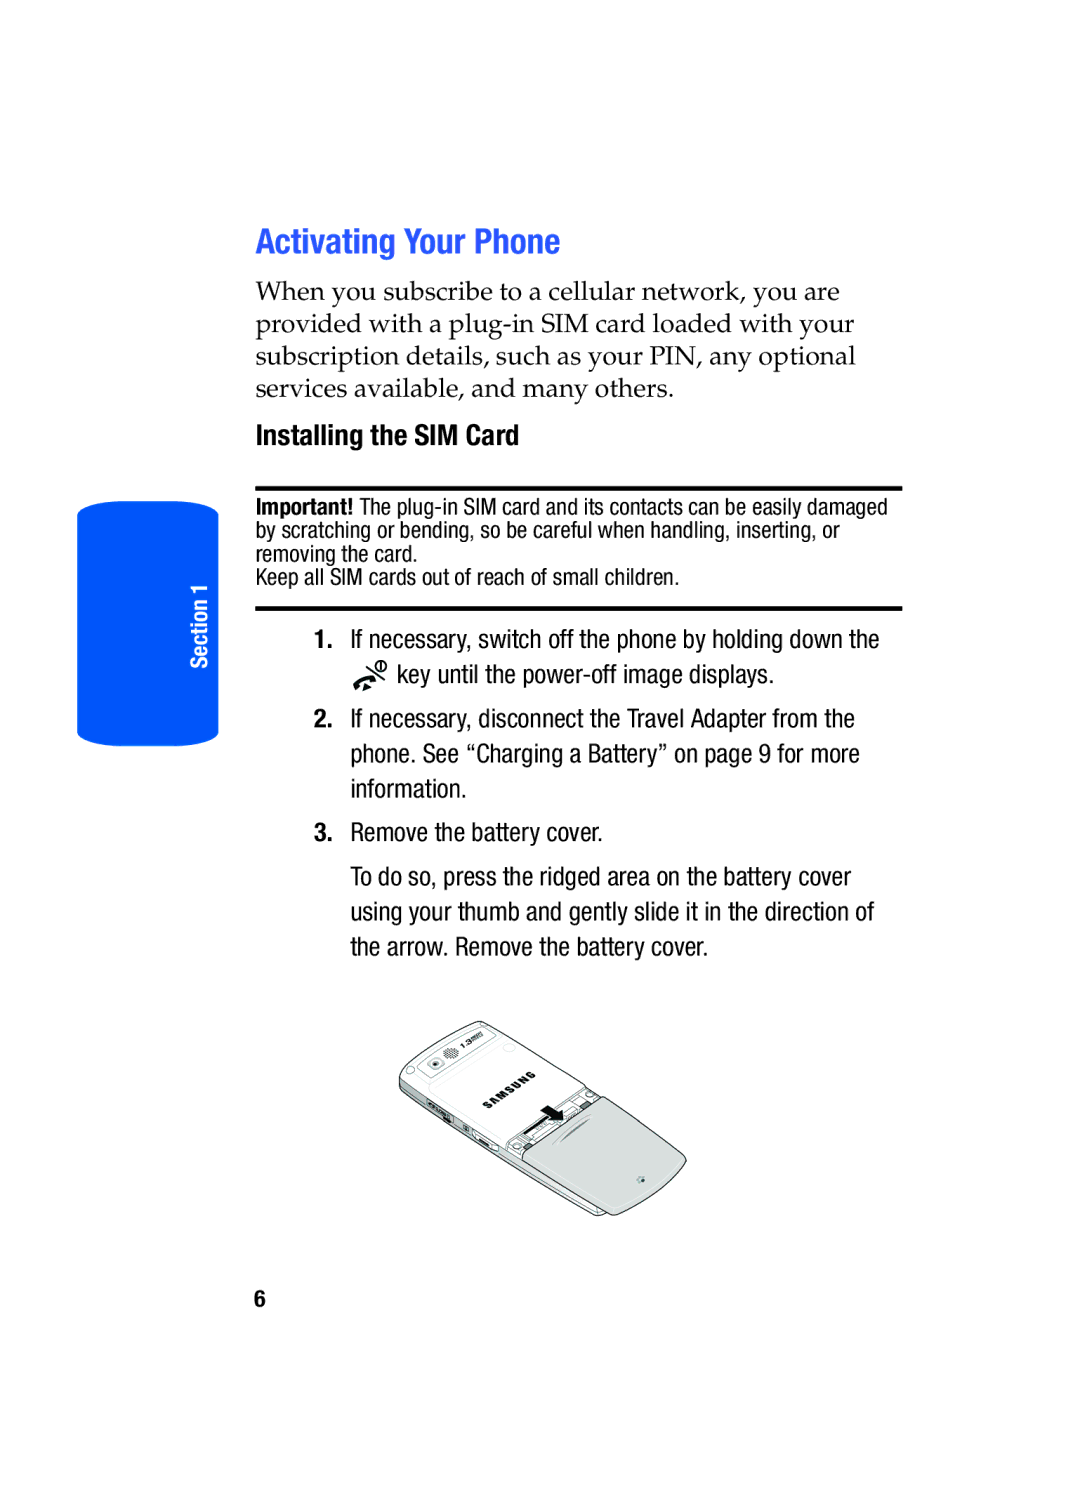 Samsung SGH-T519 manual Activating Your Phone, Installing the SIM Card 